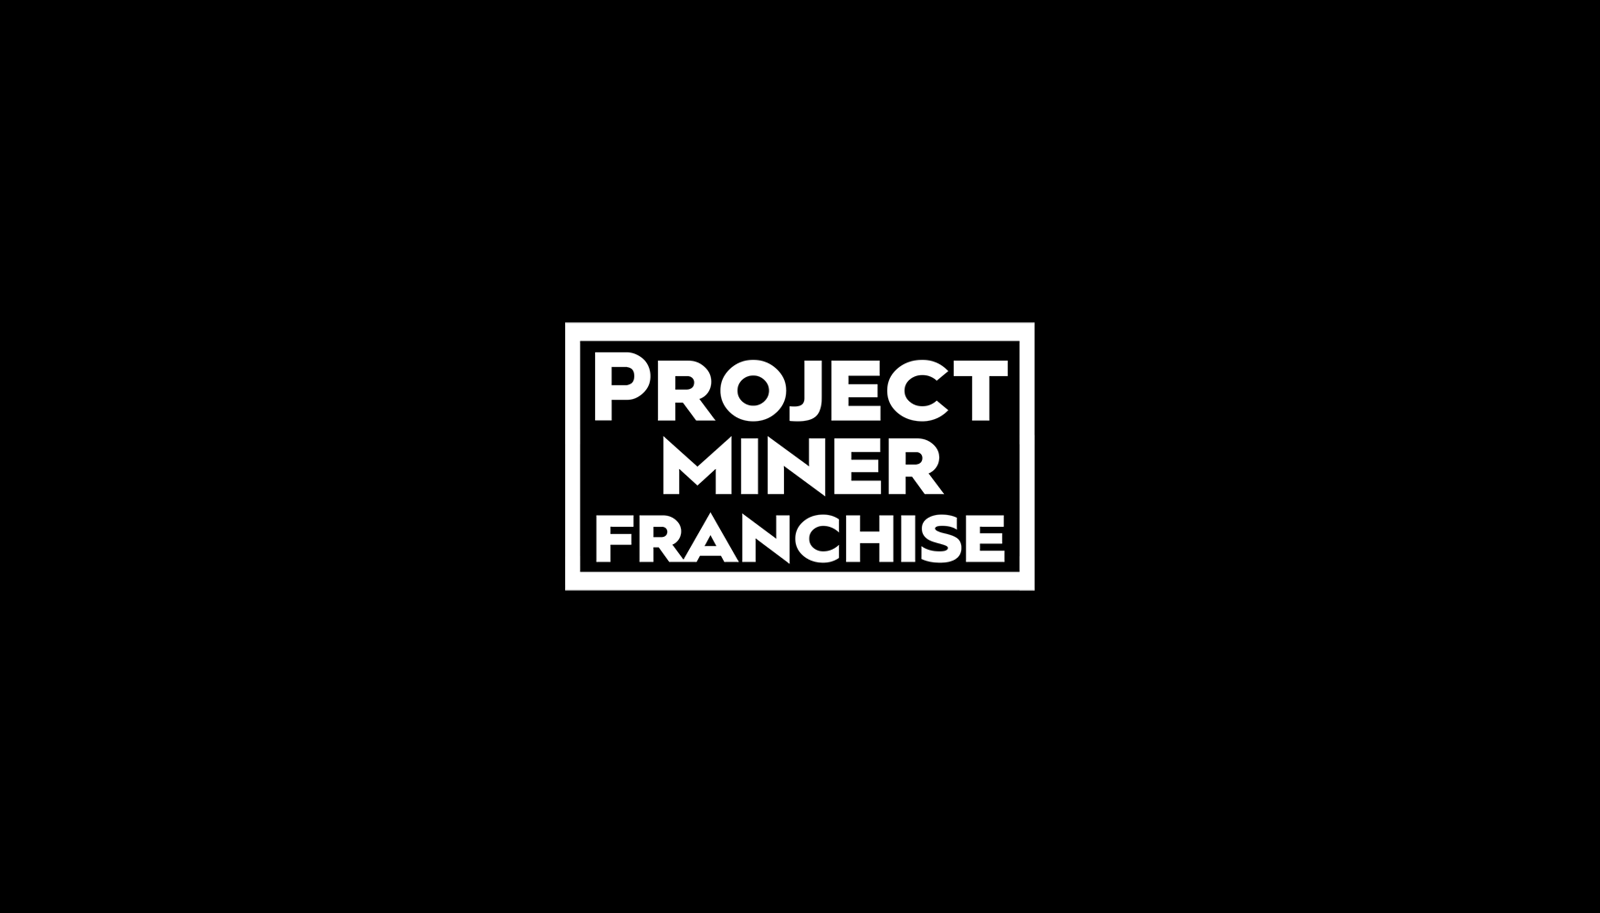 Project Minor Franchise